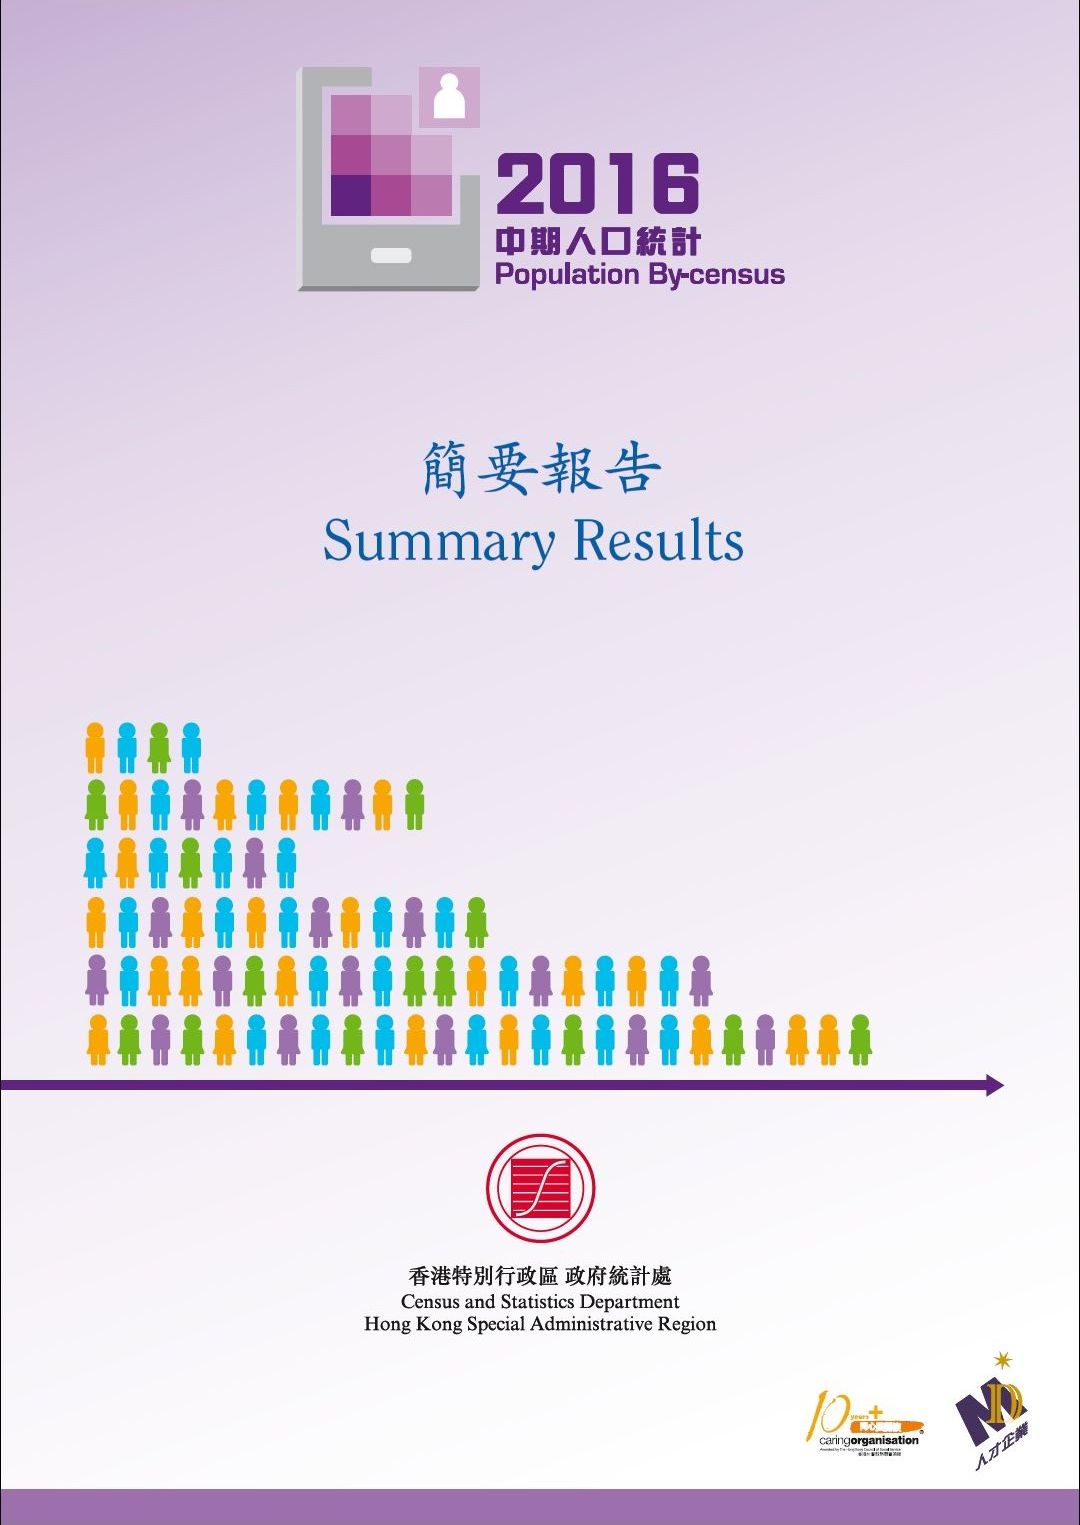 2016 Population By-census – Summary Results